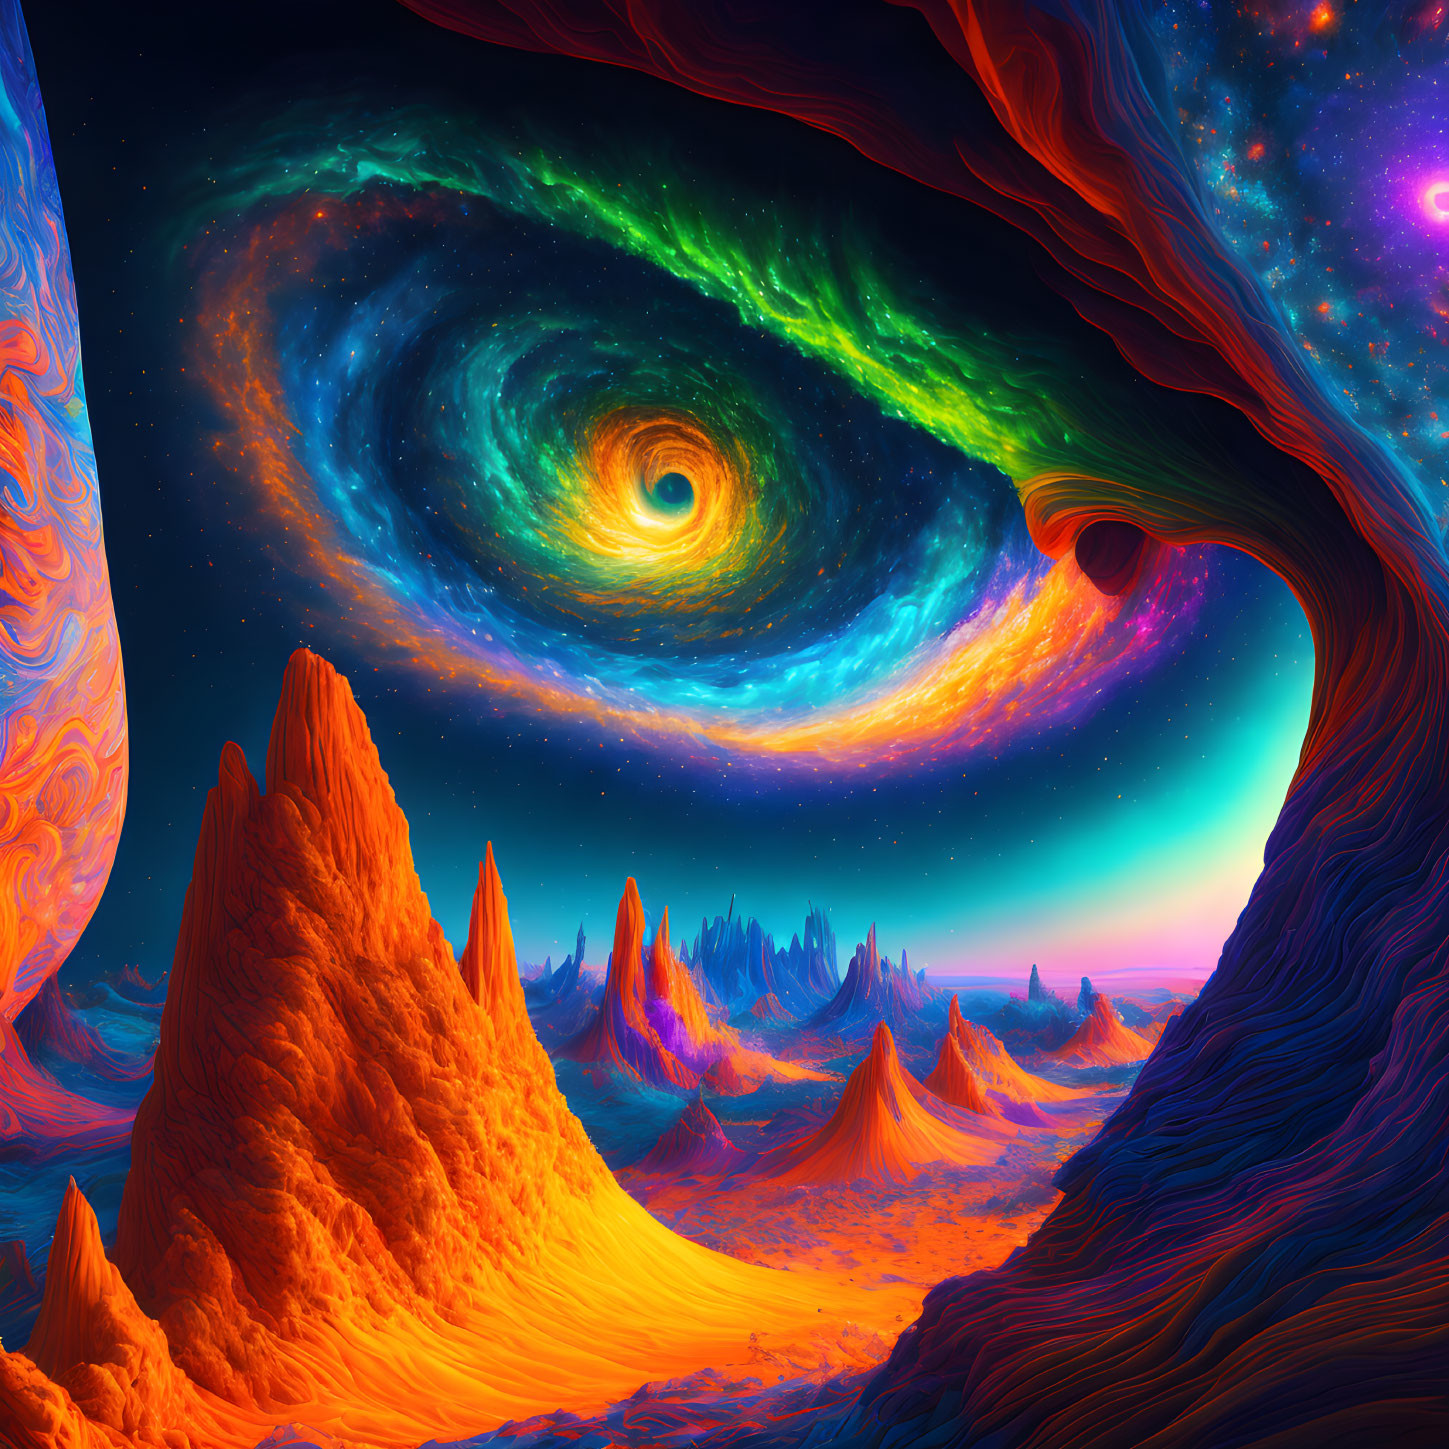 Colorful Psychedelic Landscape with Galaxy Swirls and Rock Formations